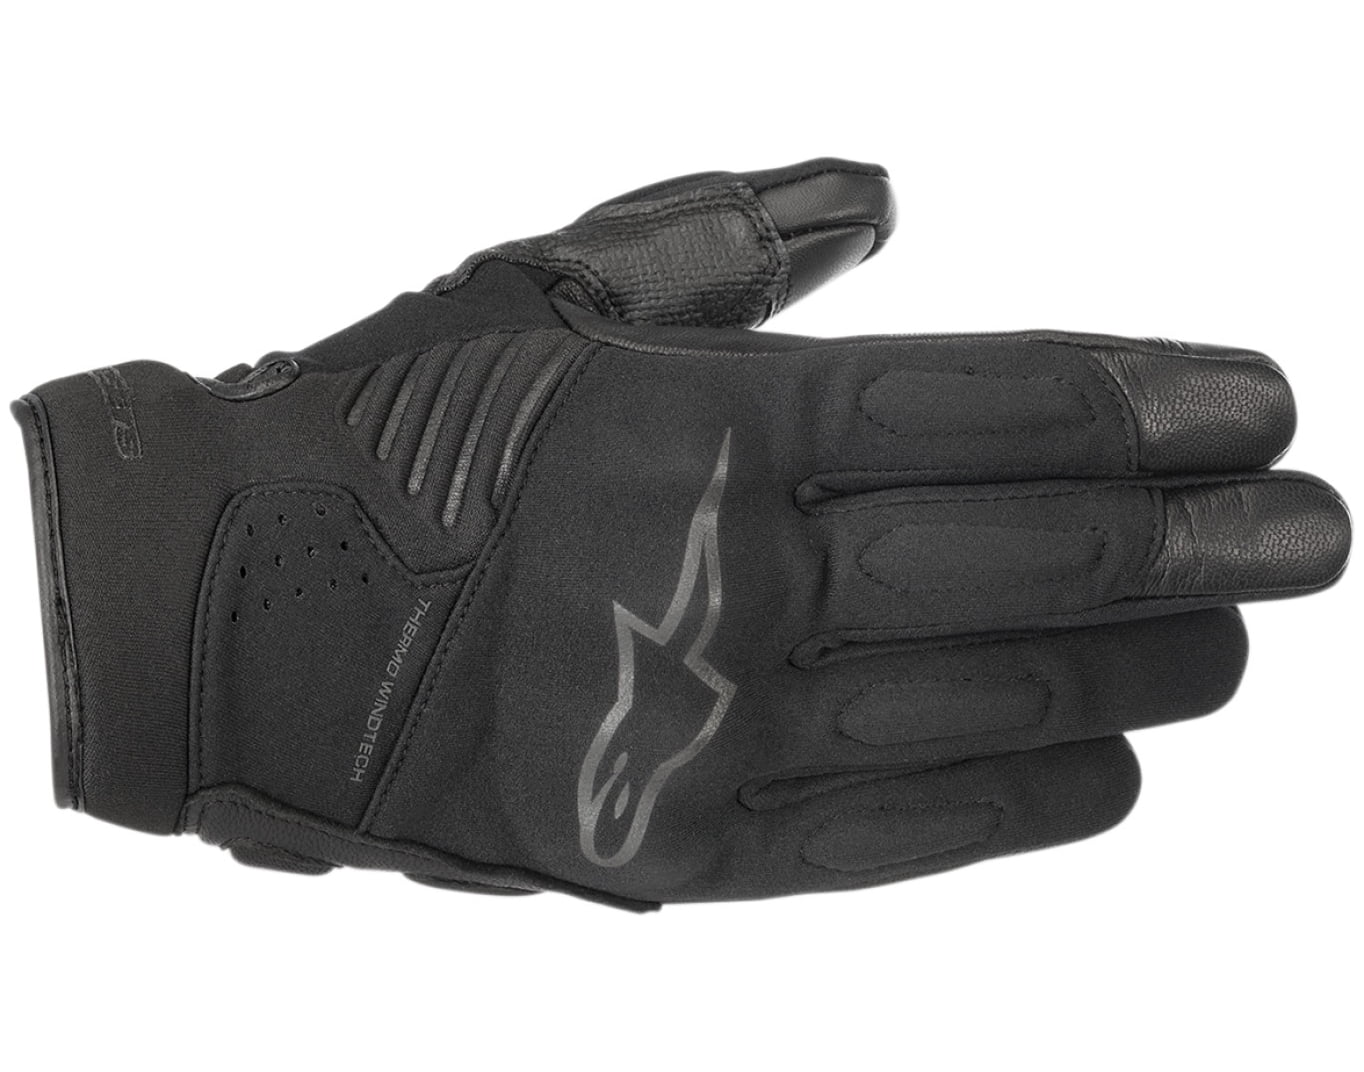 2019 New Waterproof Softshell Leather Motorbike Motorcycle Gloves Carbon Knuckle 